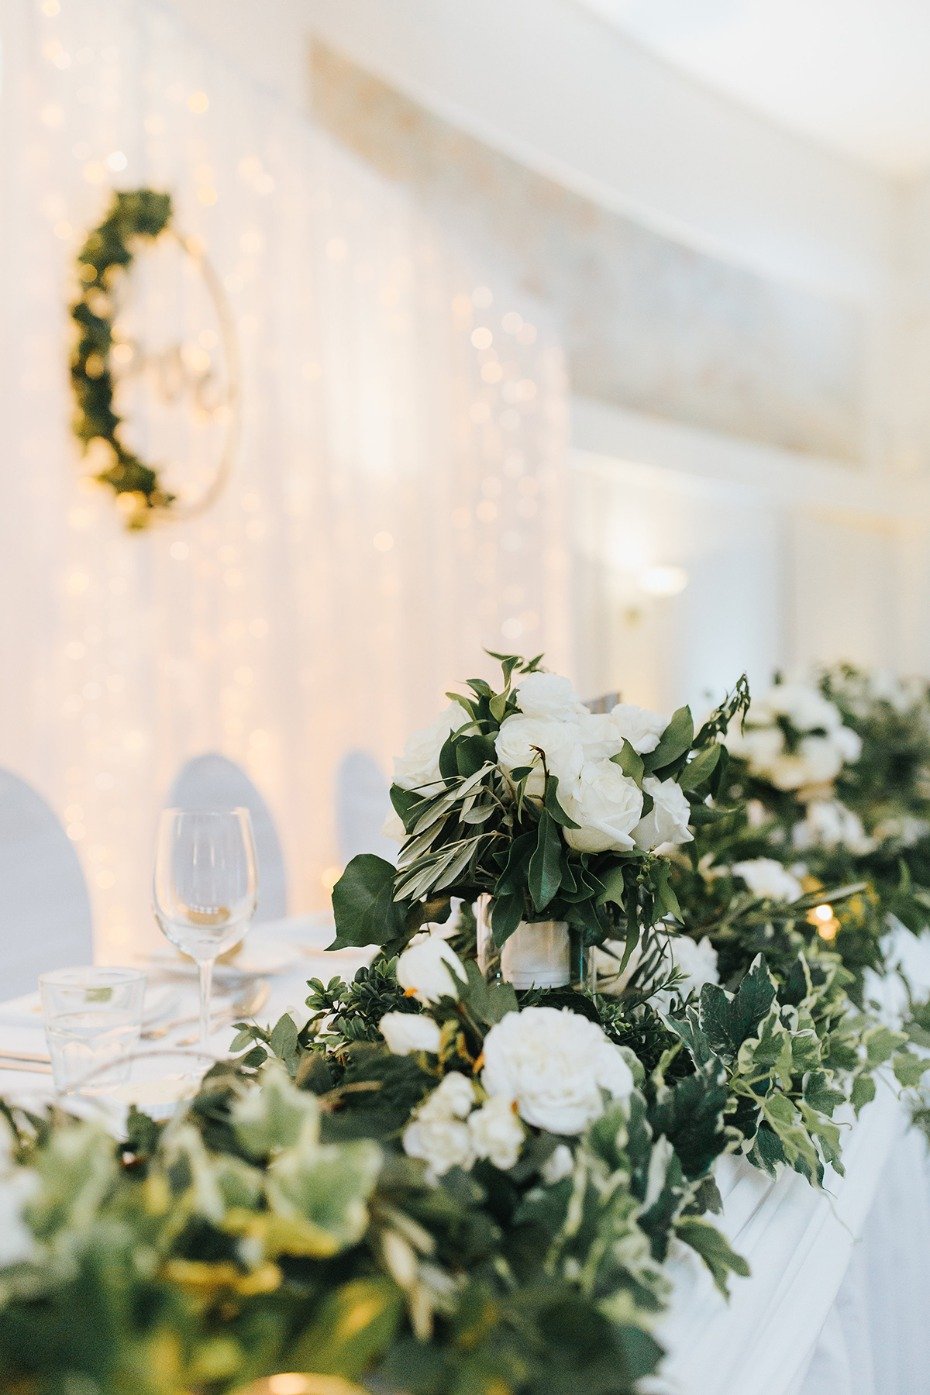 white and gold wedding table decor